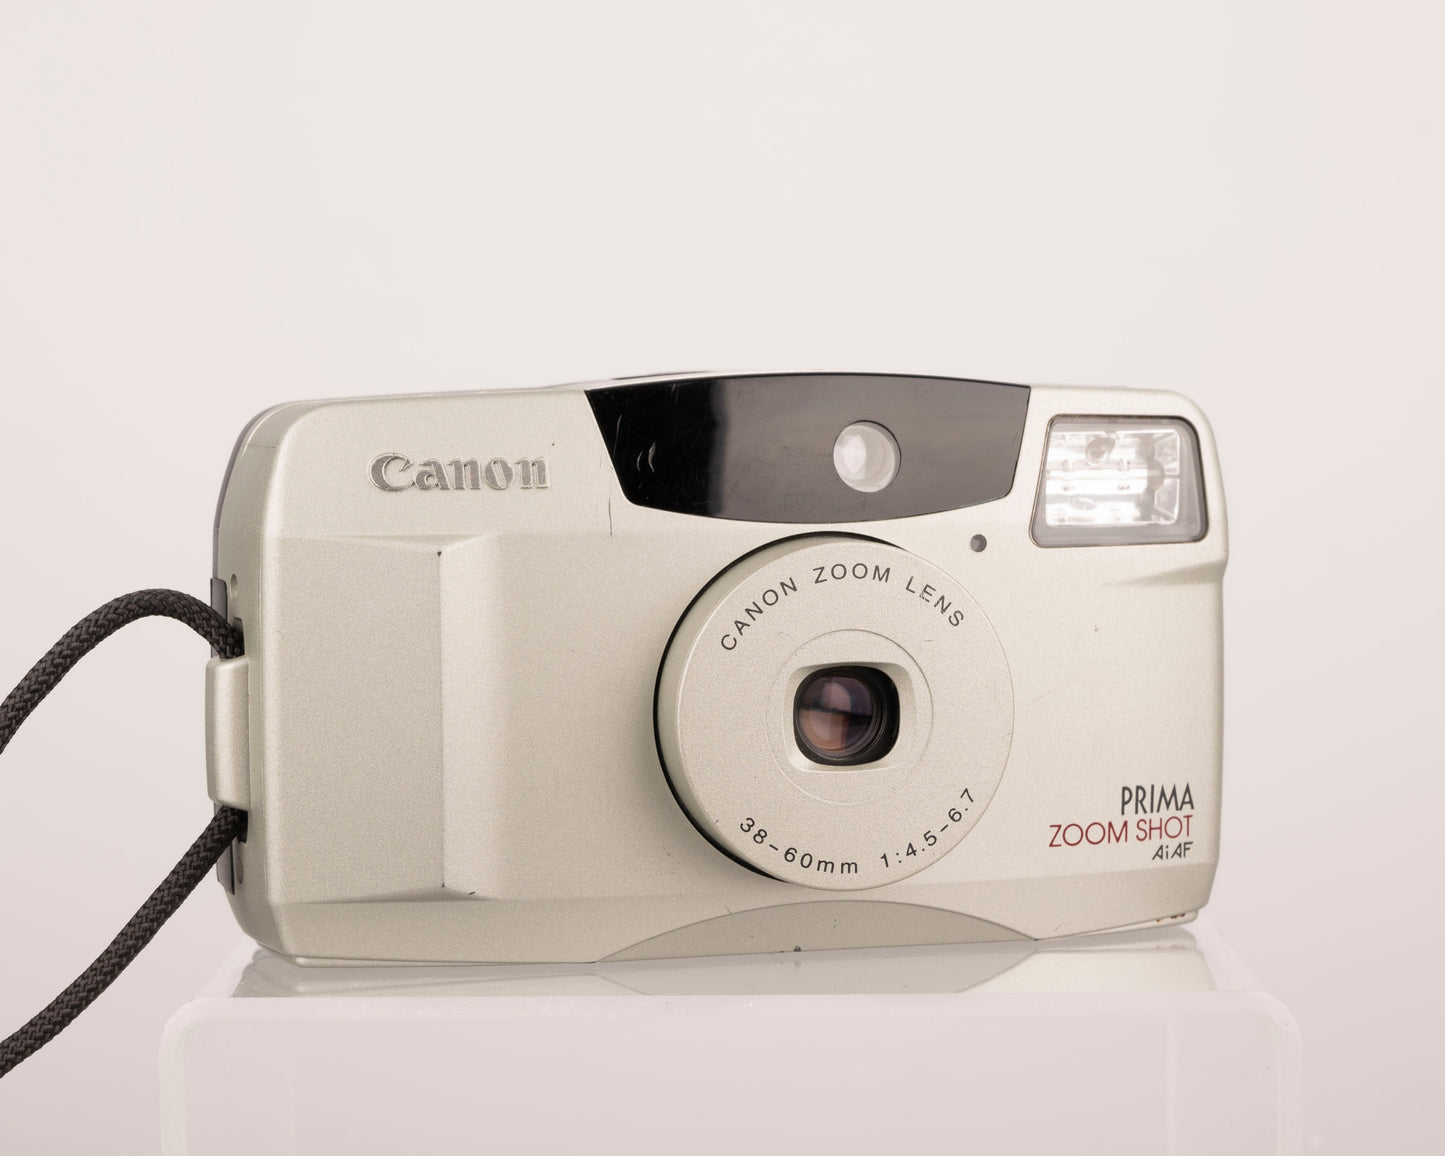 The Canon Prima Zoom Shot (aka Canon Sure Shot 60 Zoom) is an easy-to-use 35mm film point-and-shoot from the 1990s capable of very nice image quality